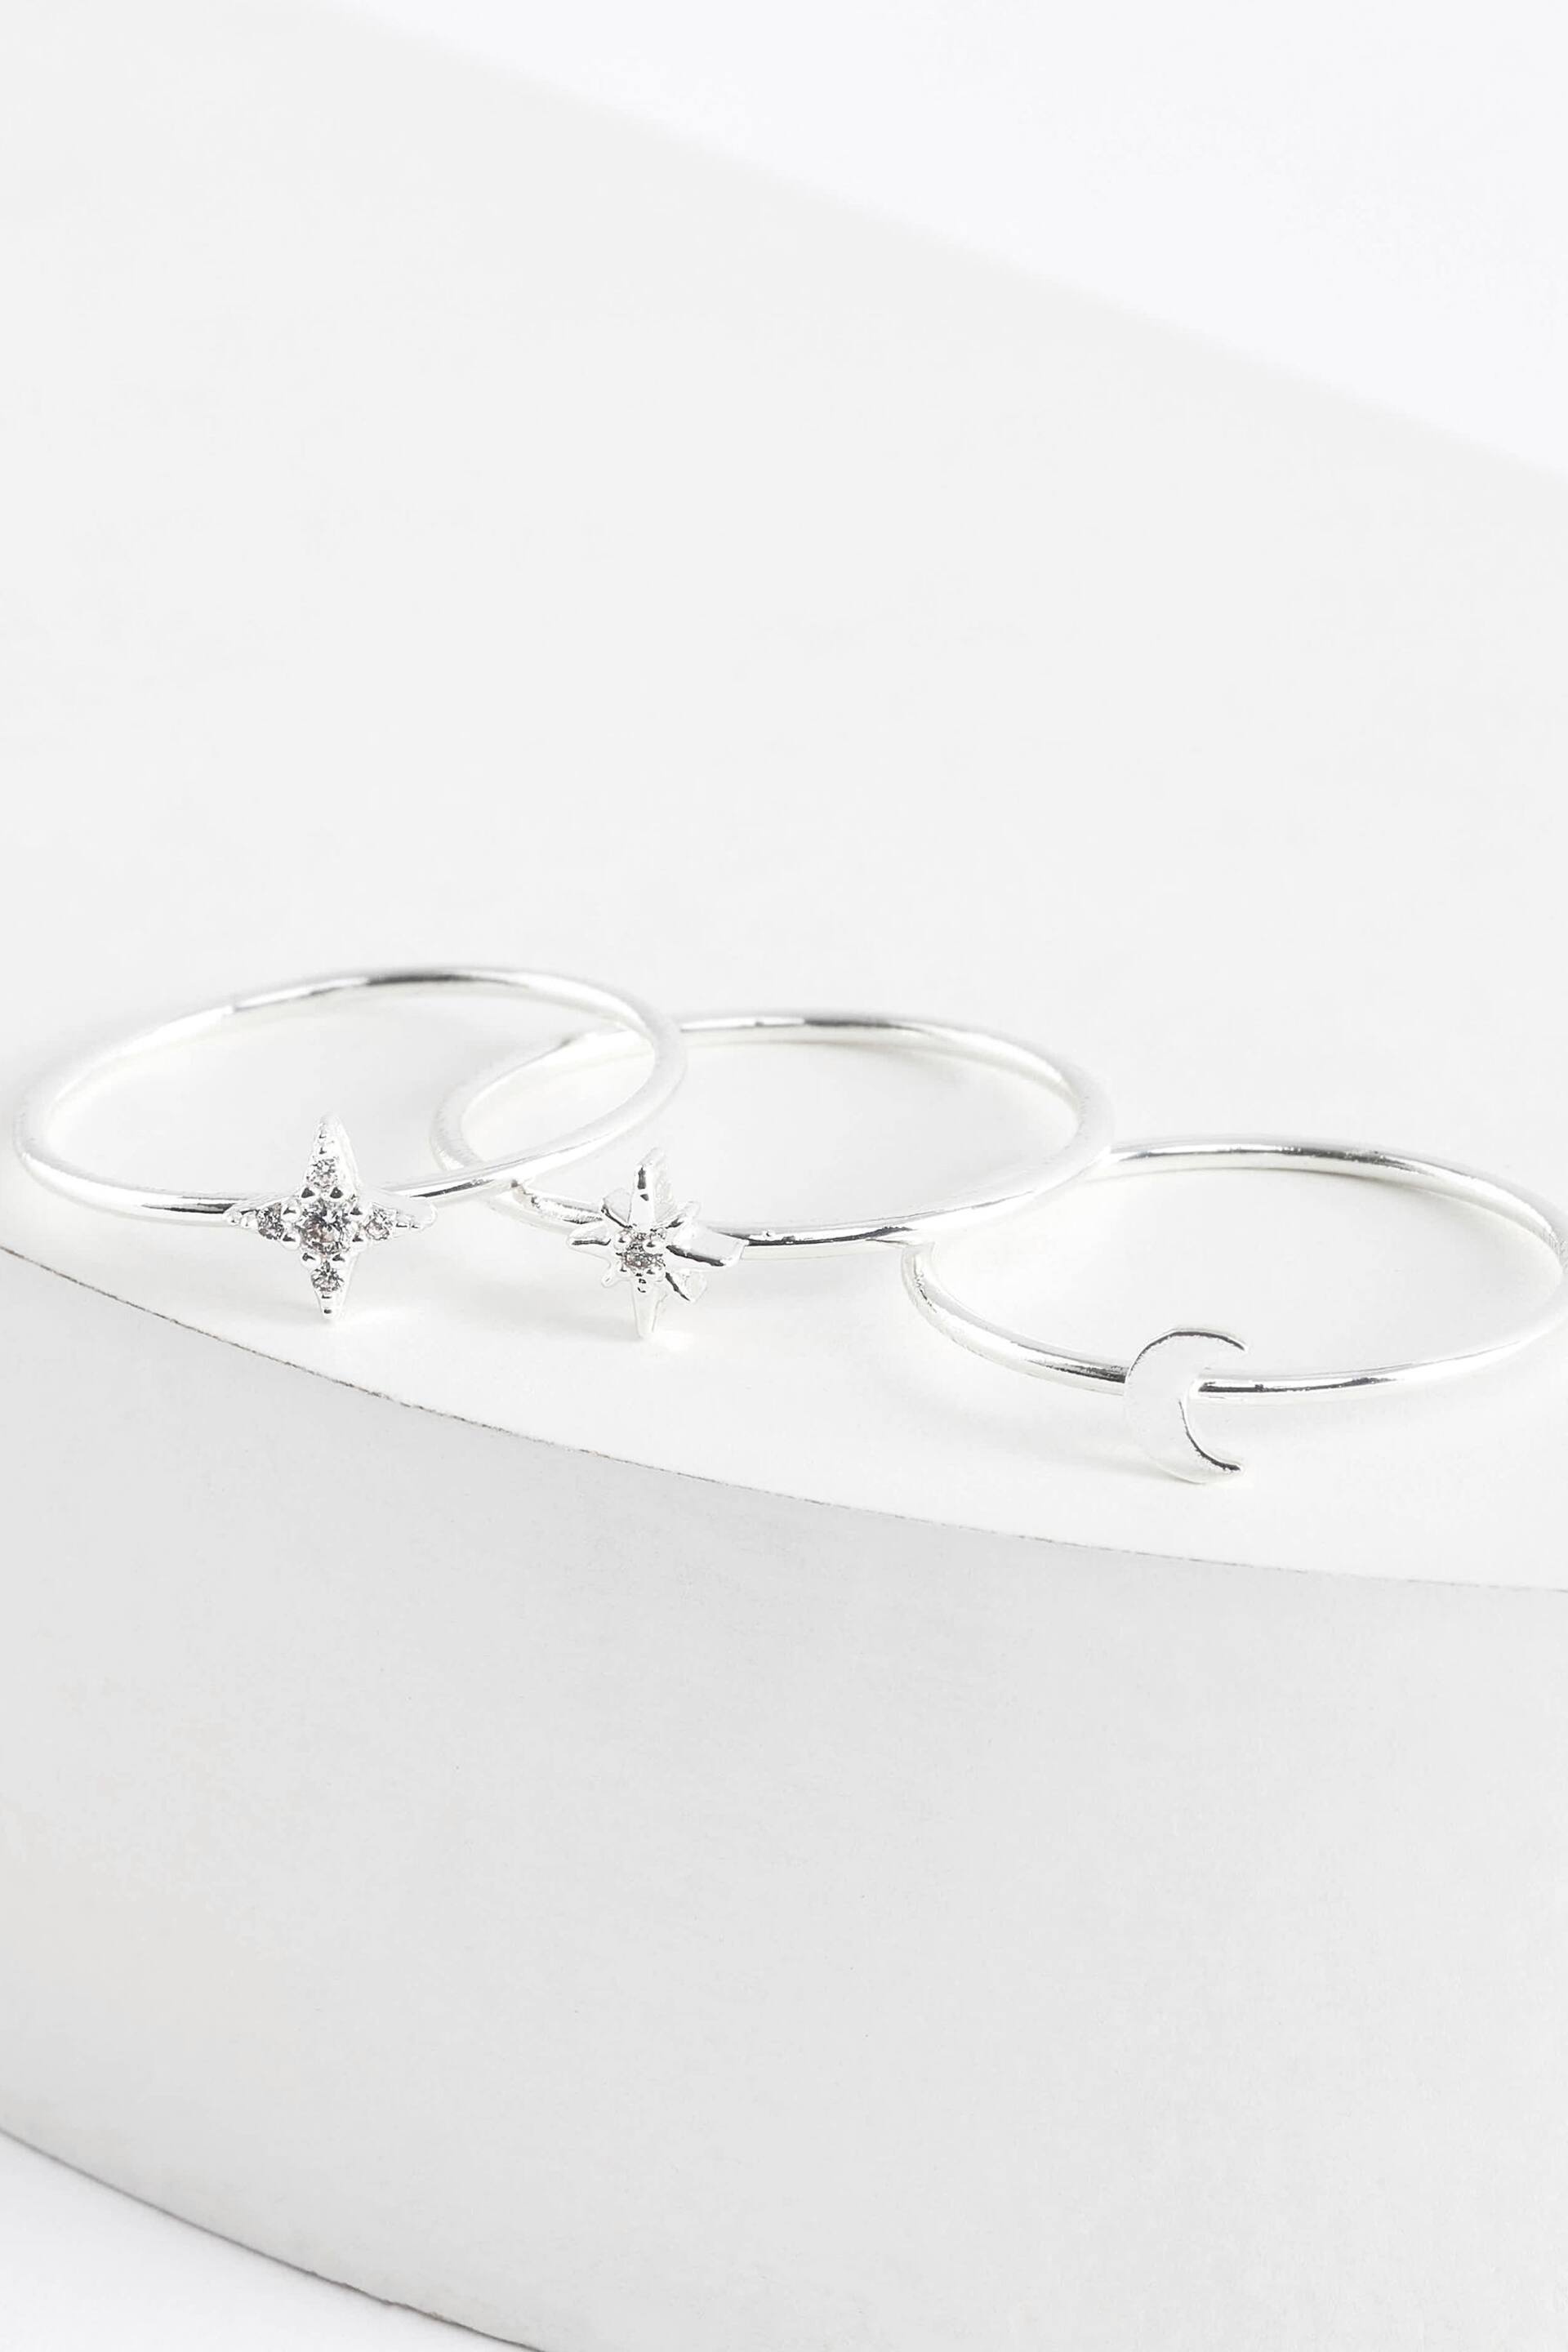 Orelia London Silver Plated Celestial Stacking Rings - Image 1 of 3